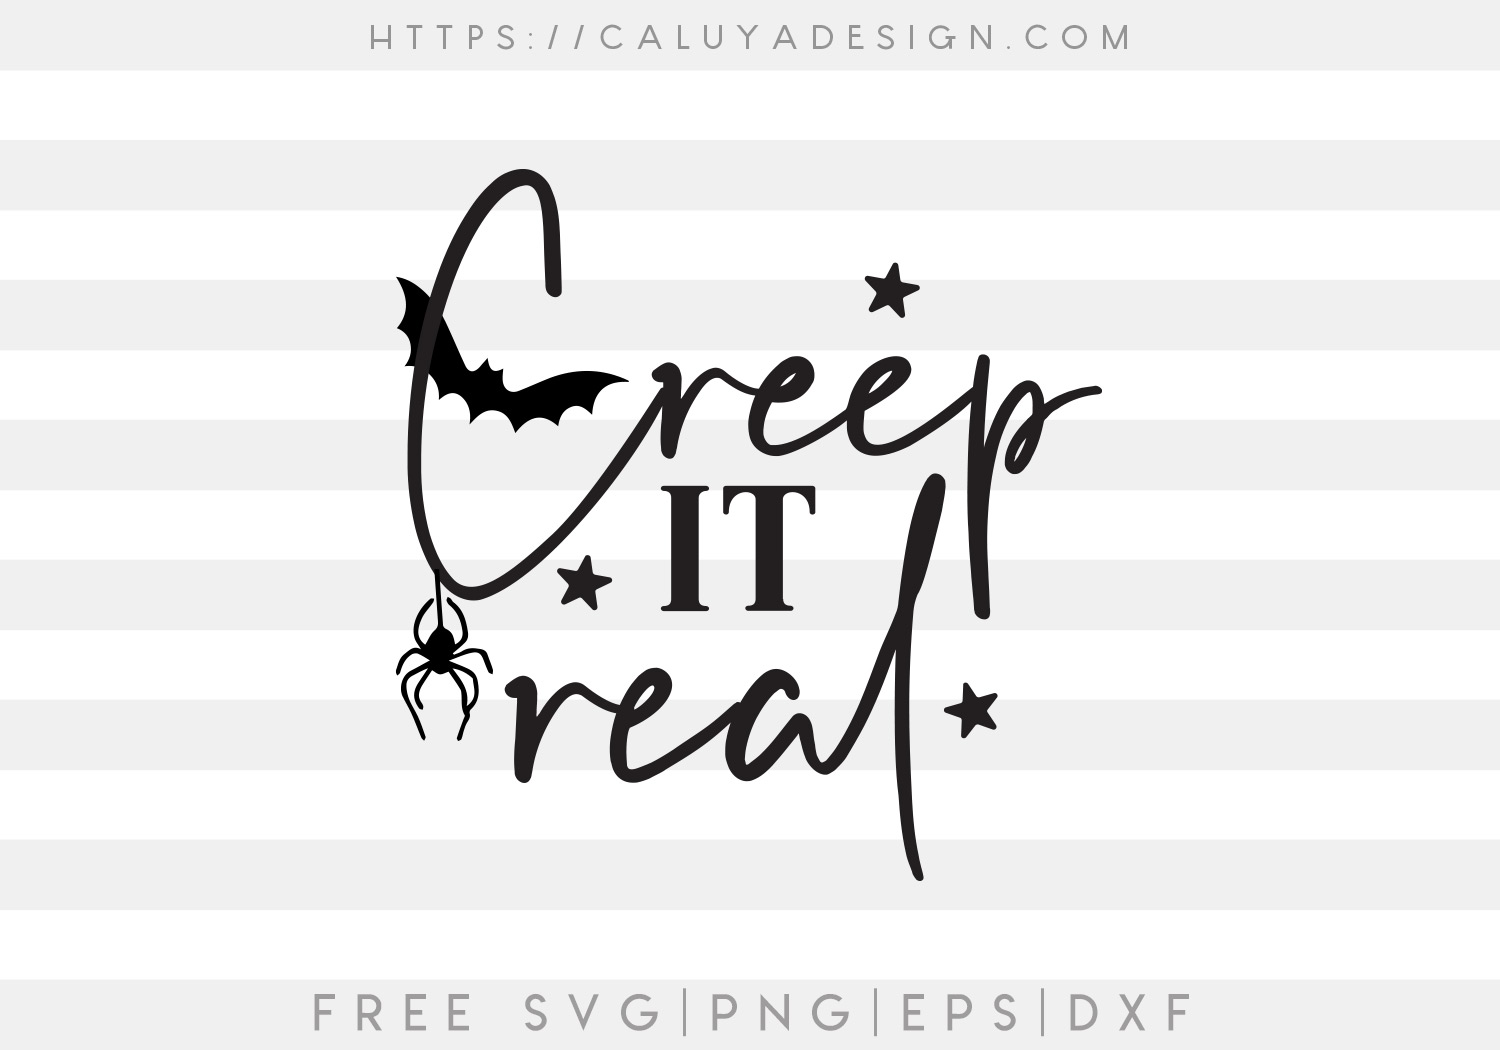 Creep It Real SVG, PNG, EPS & DXF